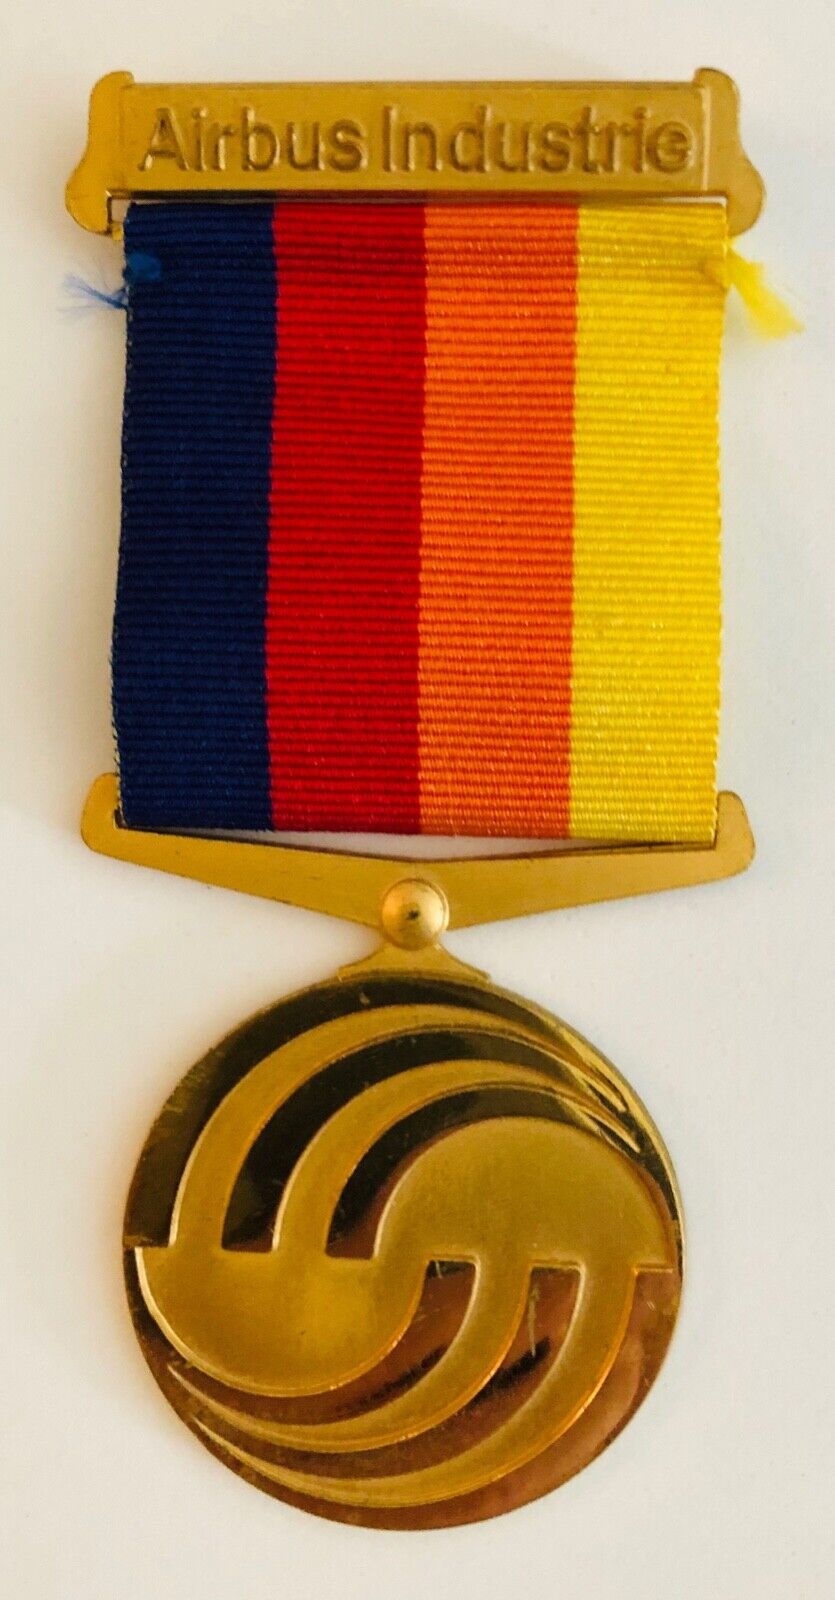 Airbus Industrie Ribbon and Medal